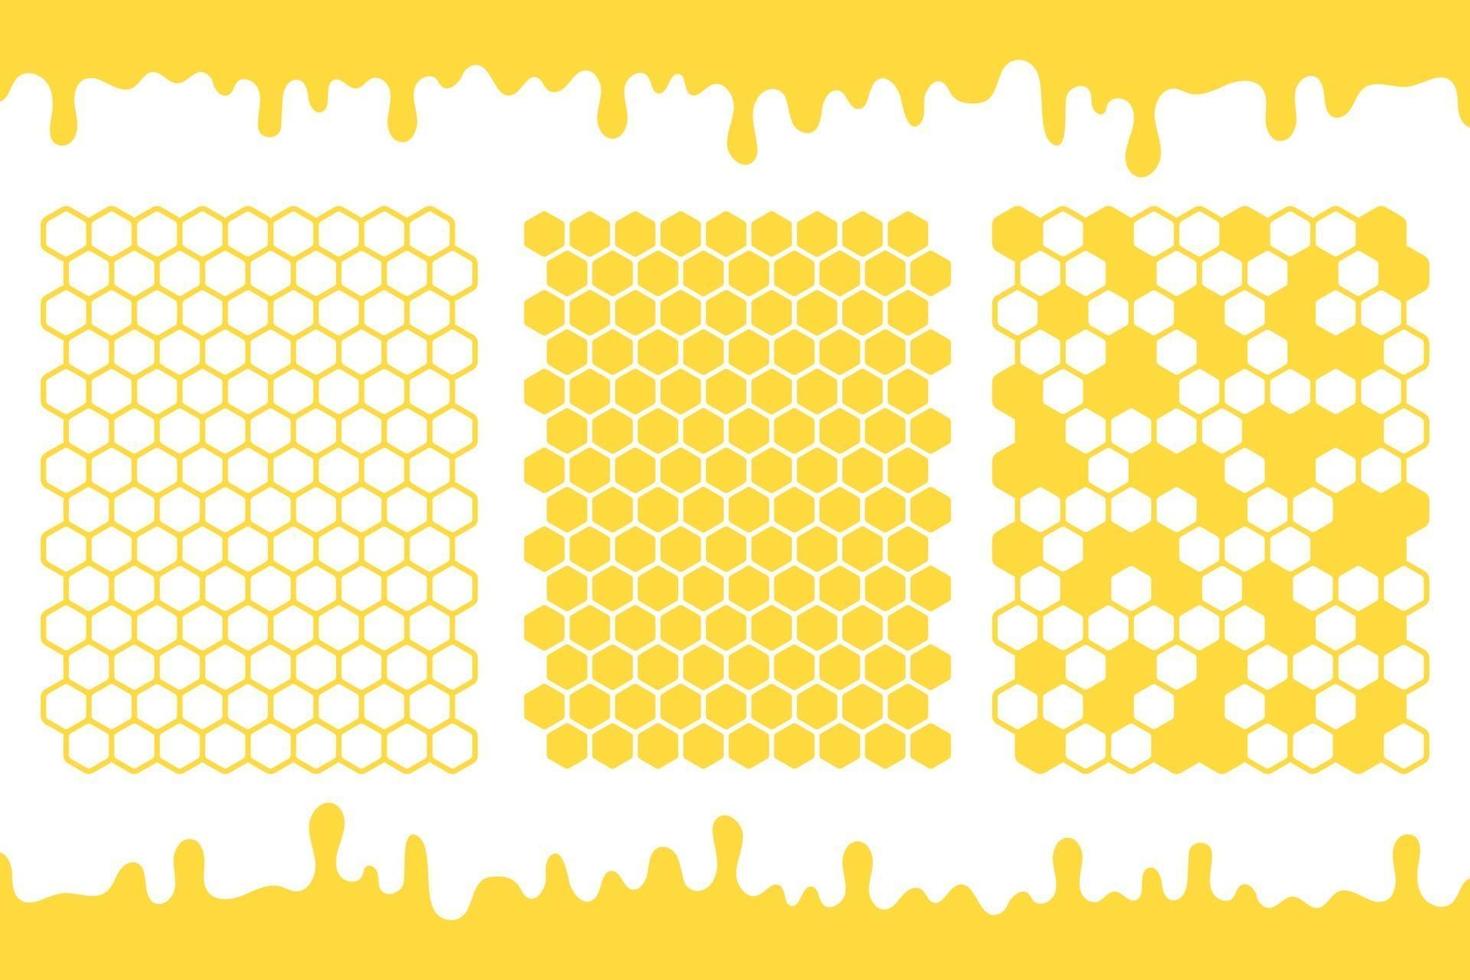 Yellow hexagonal honeycomb grid vector with honey dripping on the ground